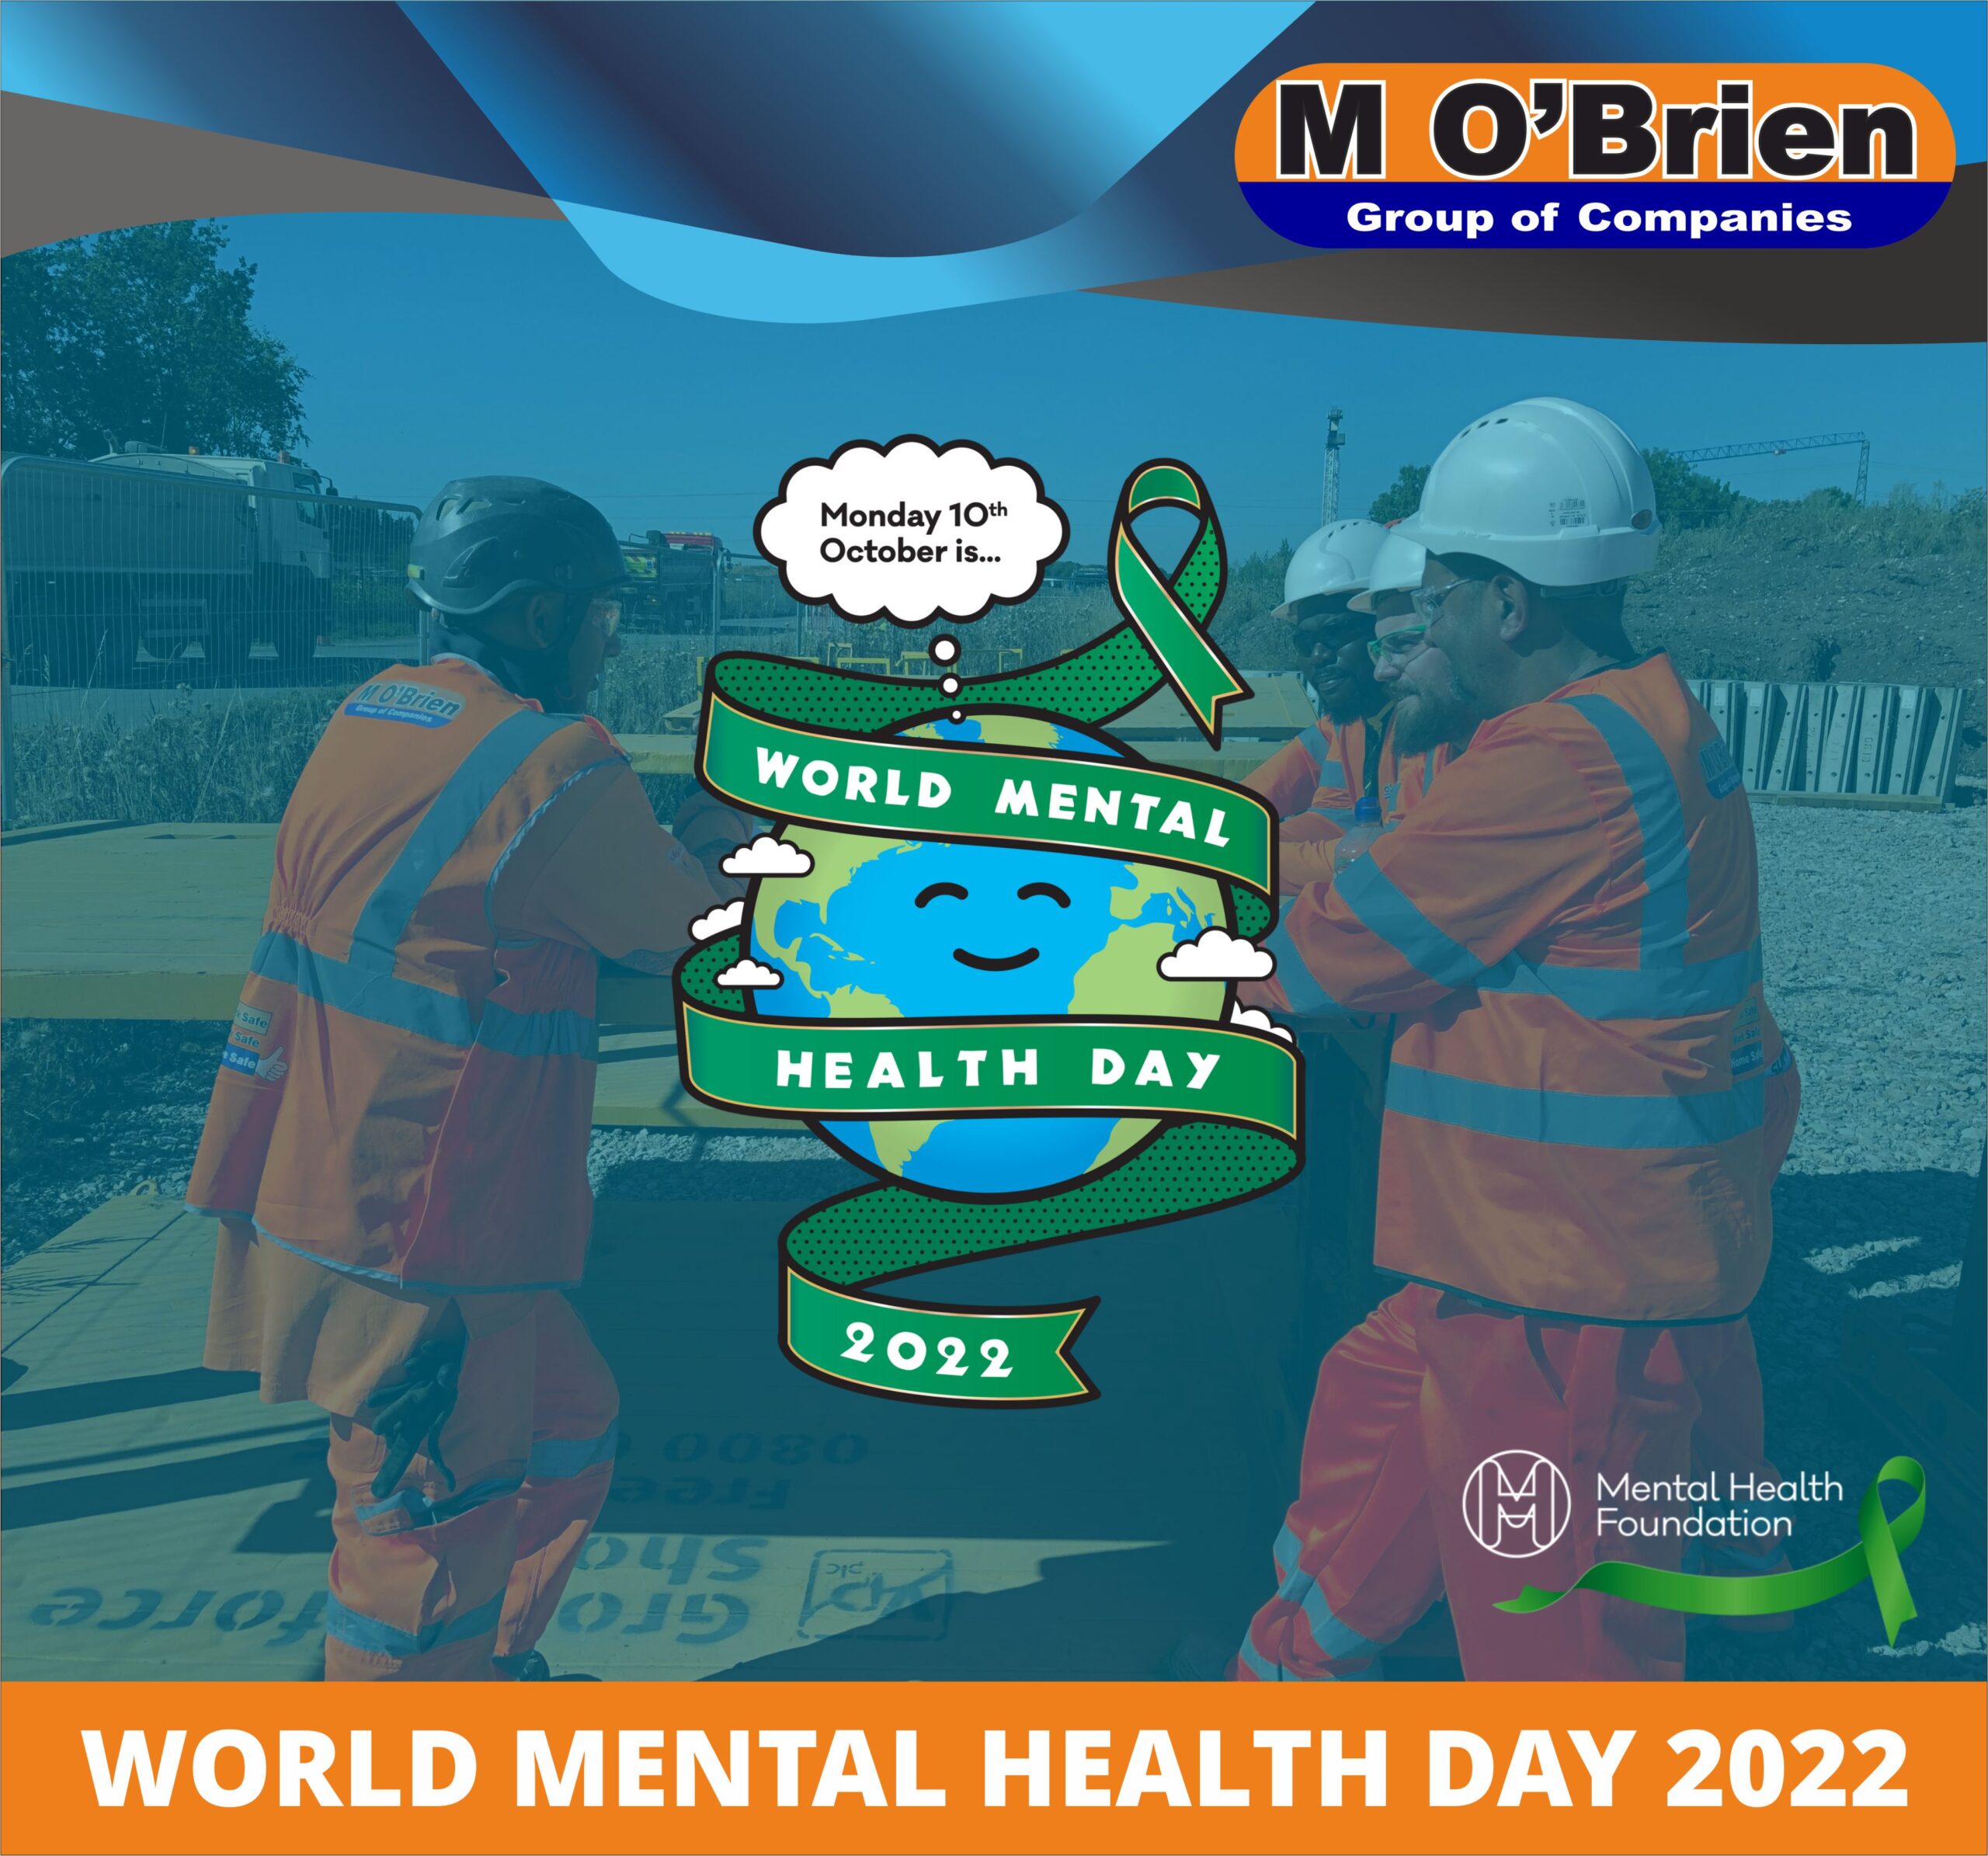 Featured image for “World Mental Health Day 2022”